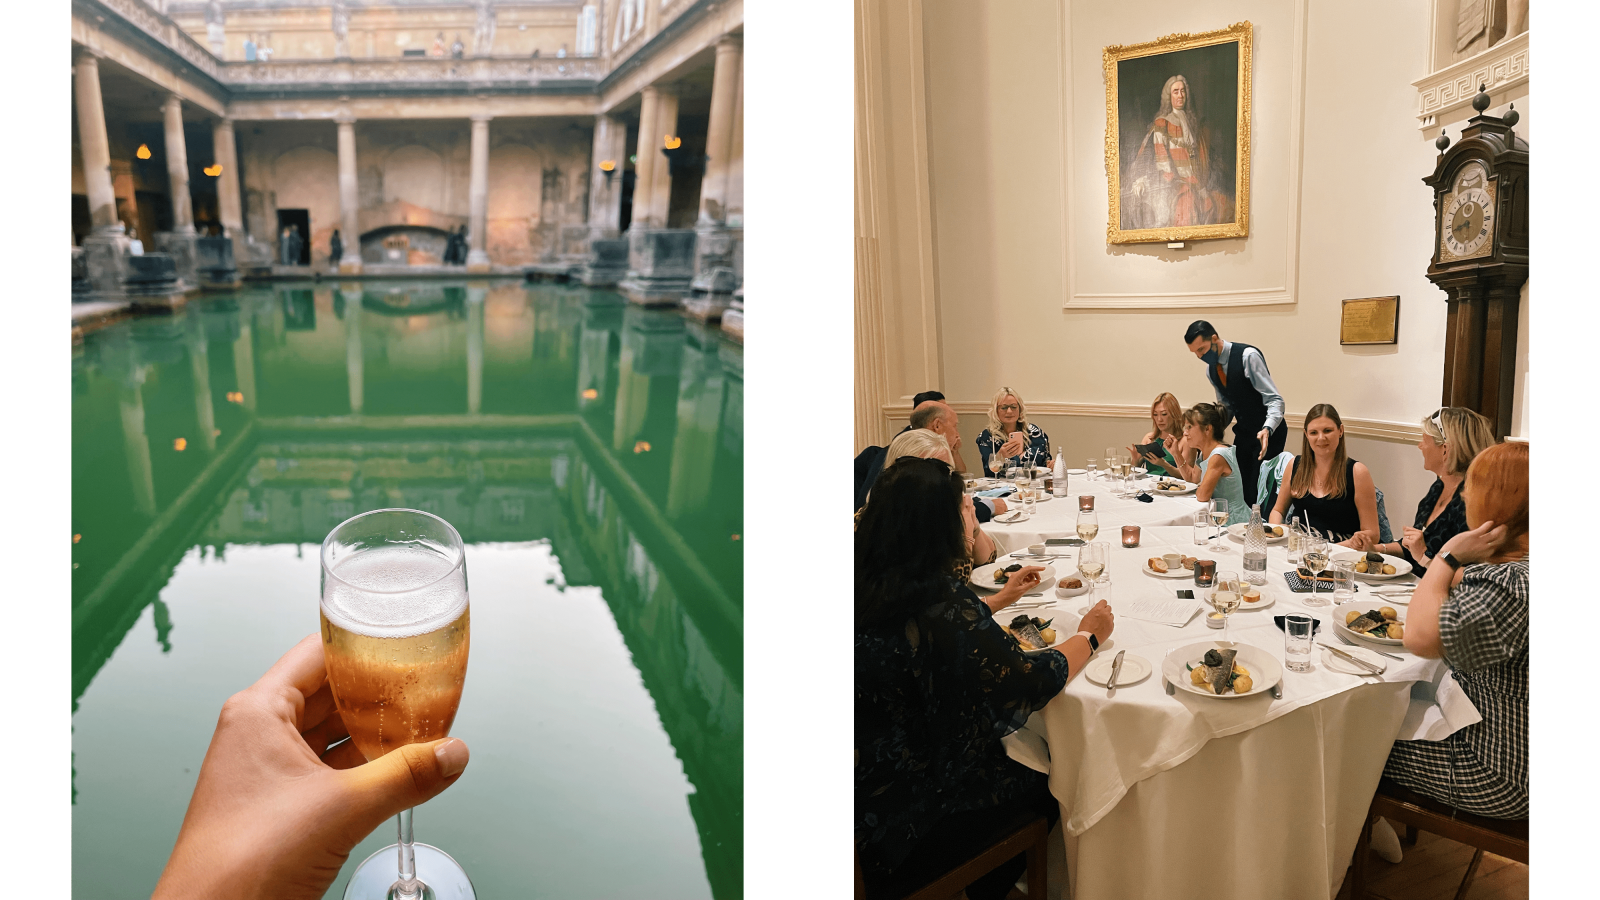 Roman Bath and people dining at the Pump Room